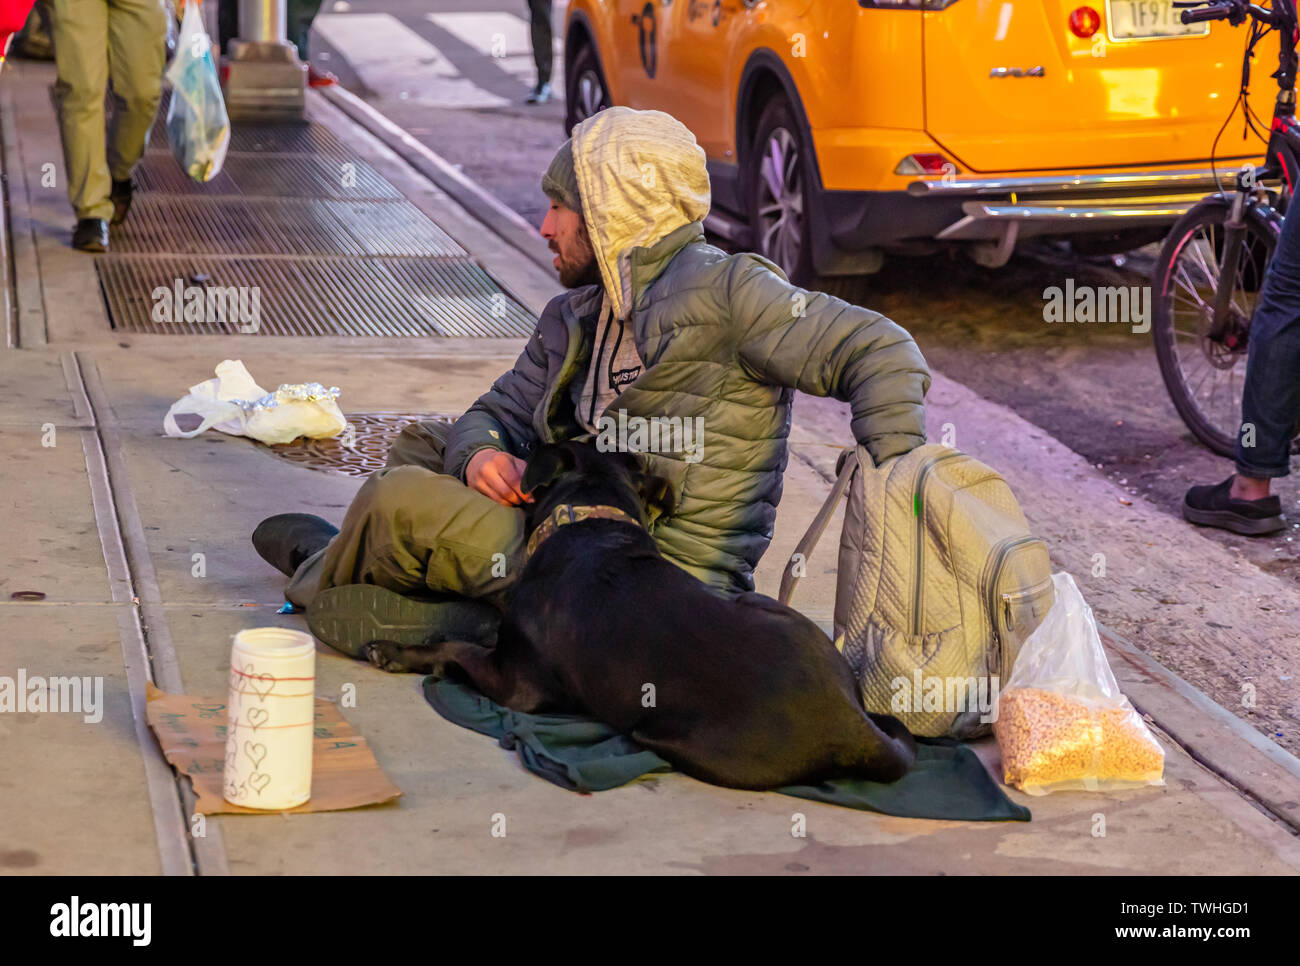 USA, New York. May 3, 2019. Homeless man and a dog sitting on the sidewalk, asking for help, Manhattan downtown Stock Photo